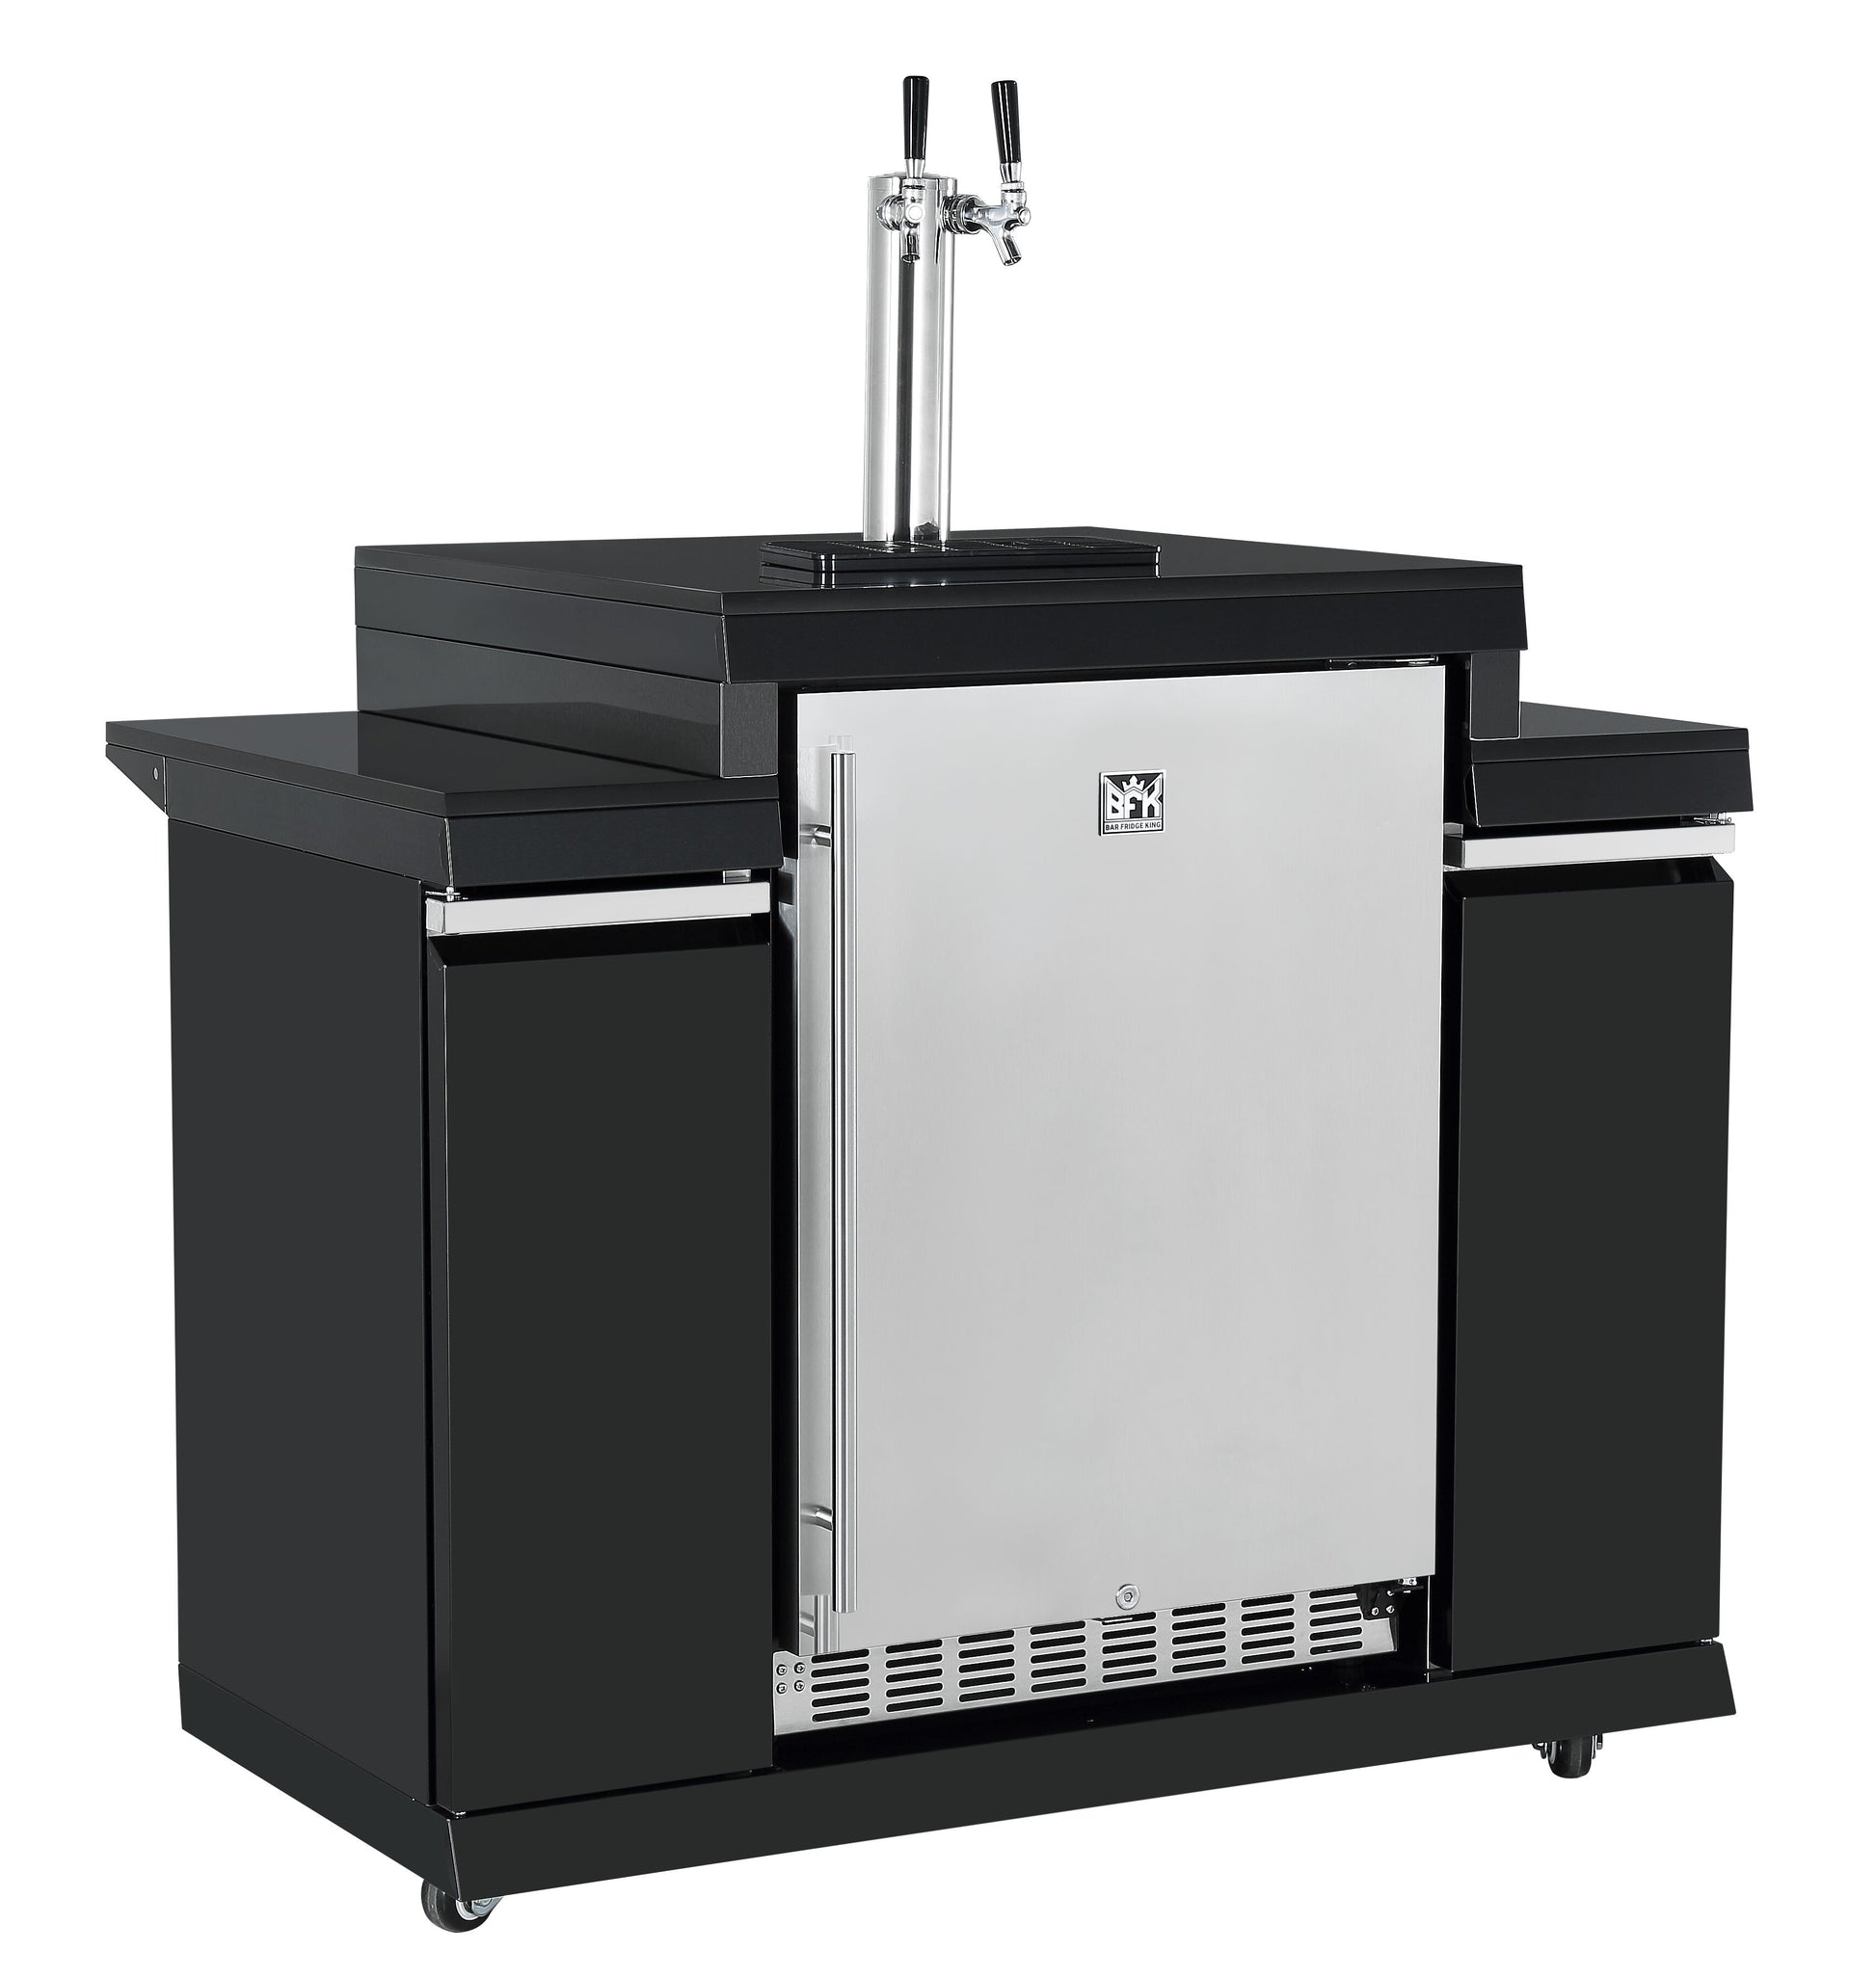 118L Kegerator Suits Grill King BBQ Kitchens Inc Stainless Steel Cabinetery, Stone Bench, Adjustable Legs & Castor Wheels